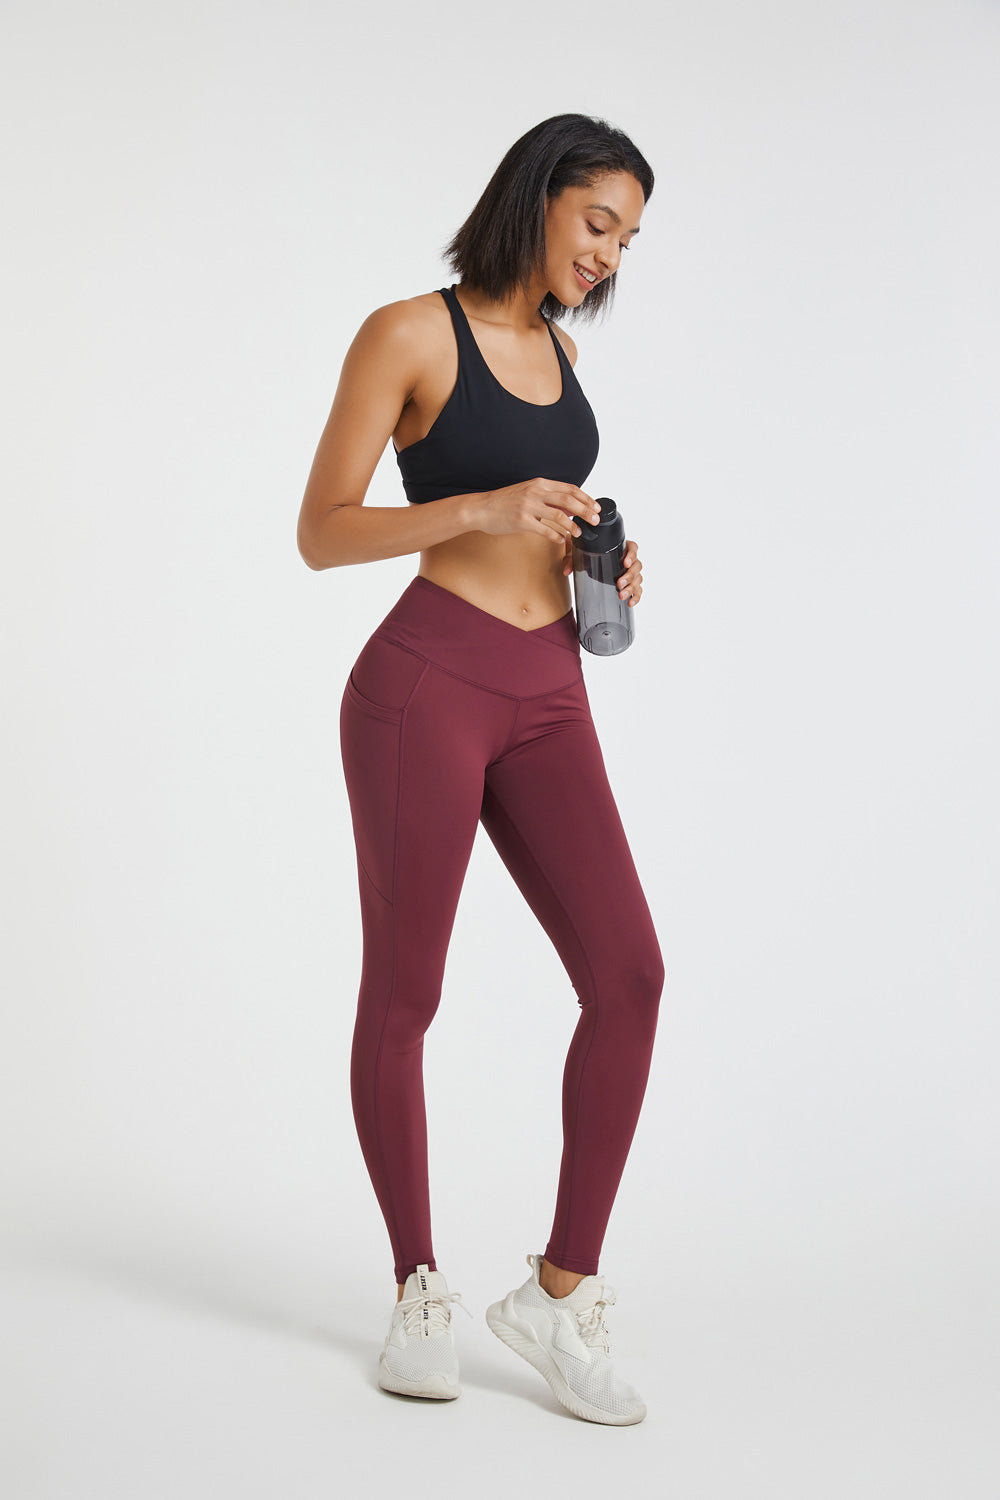 Burgundy Crossover Legging With Pockets